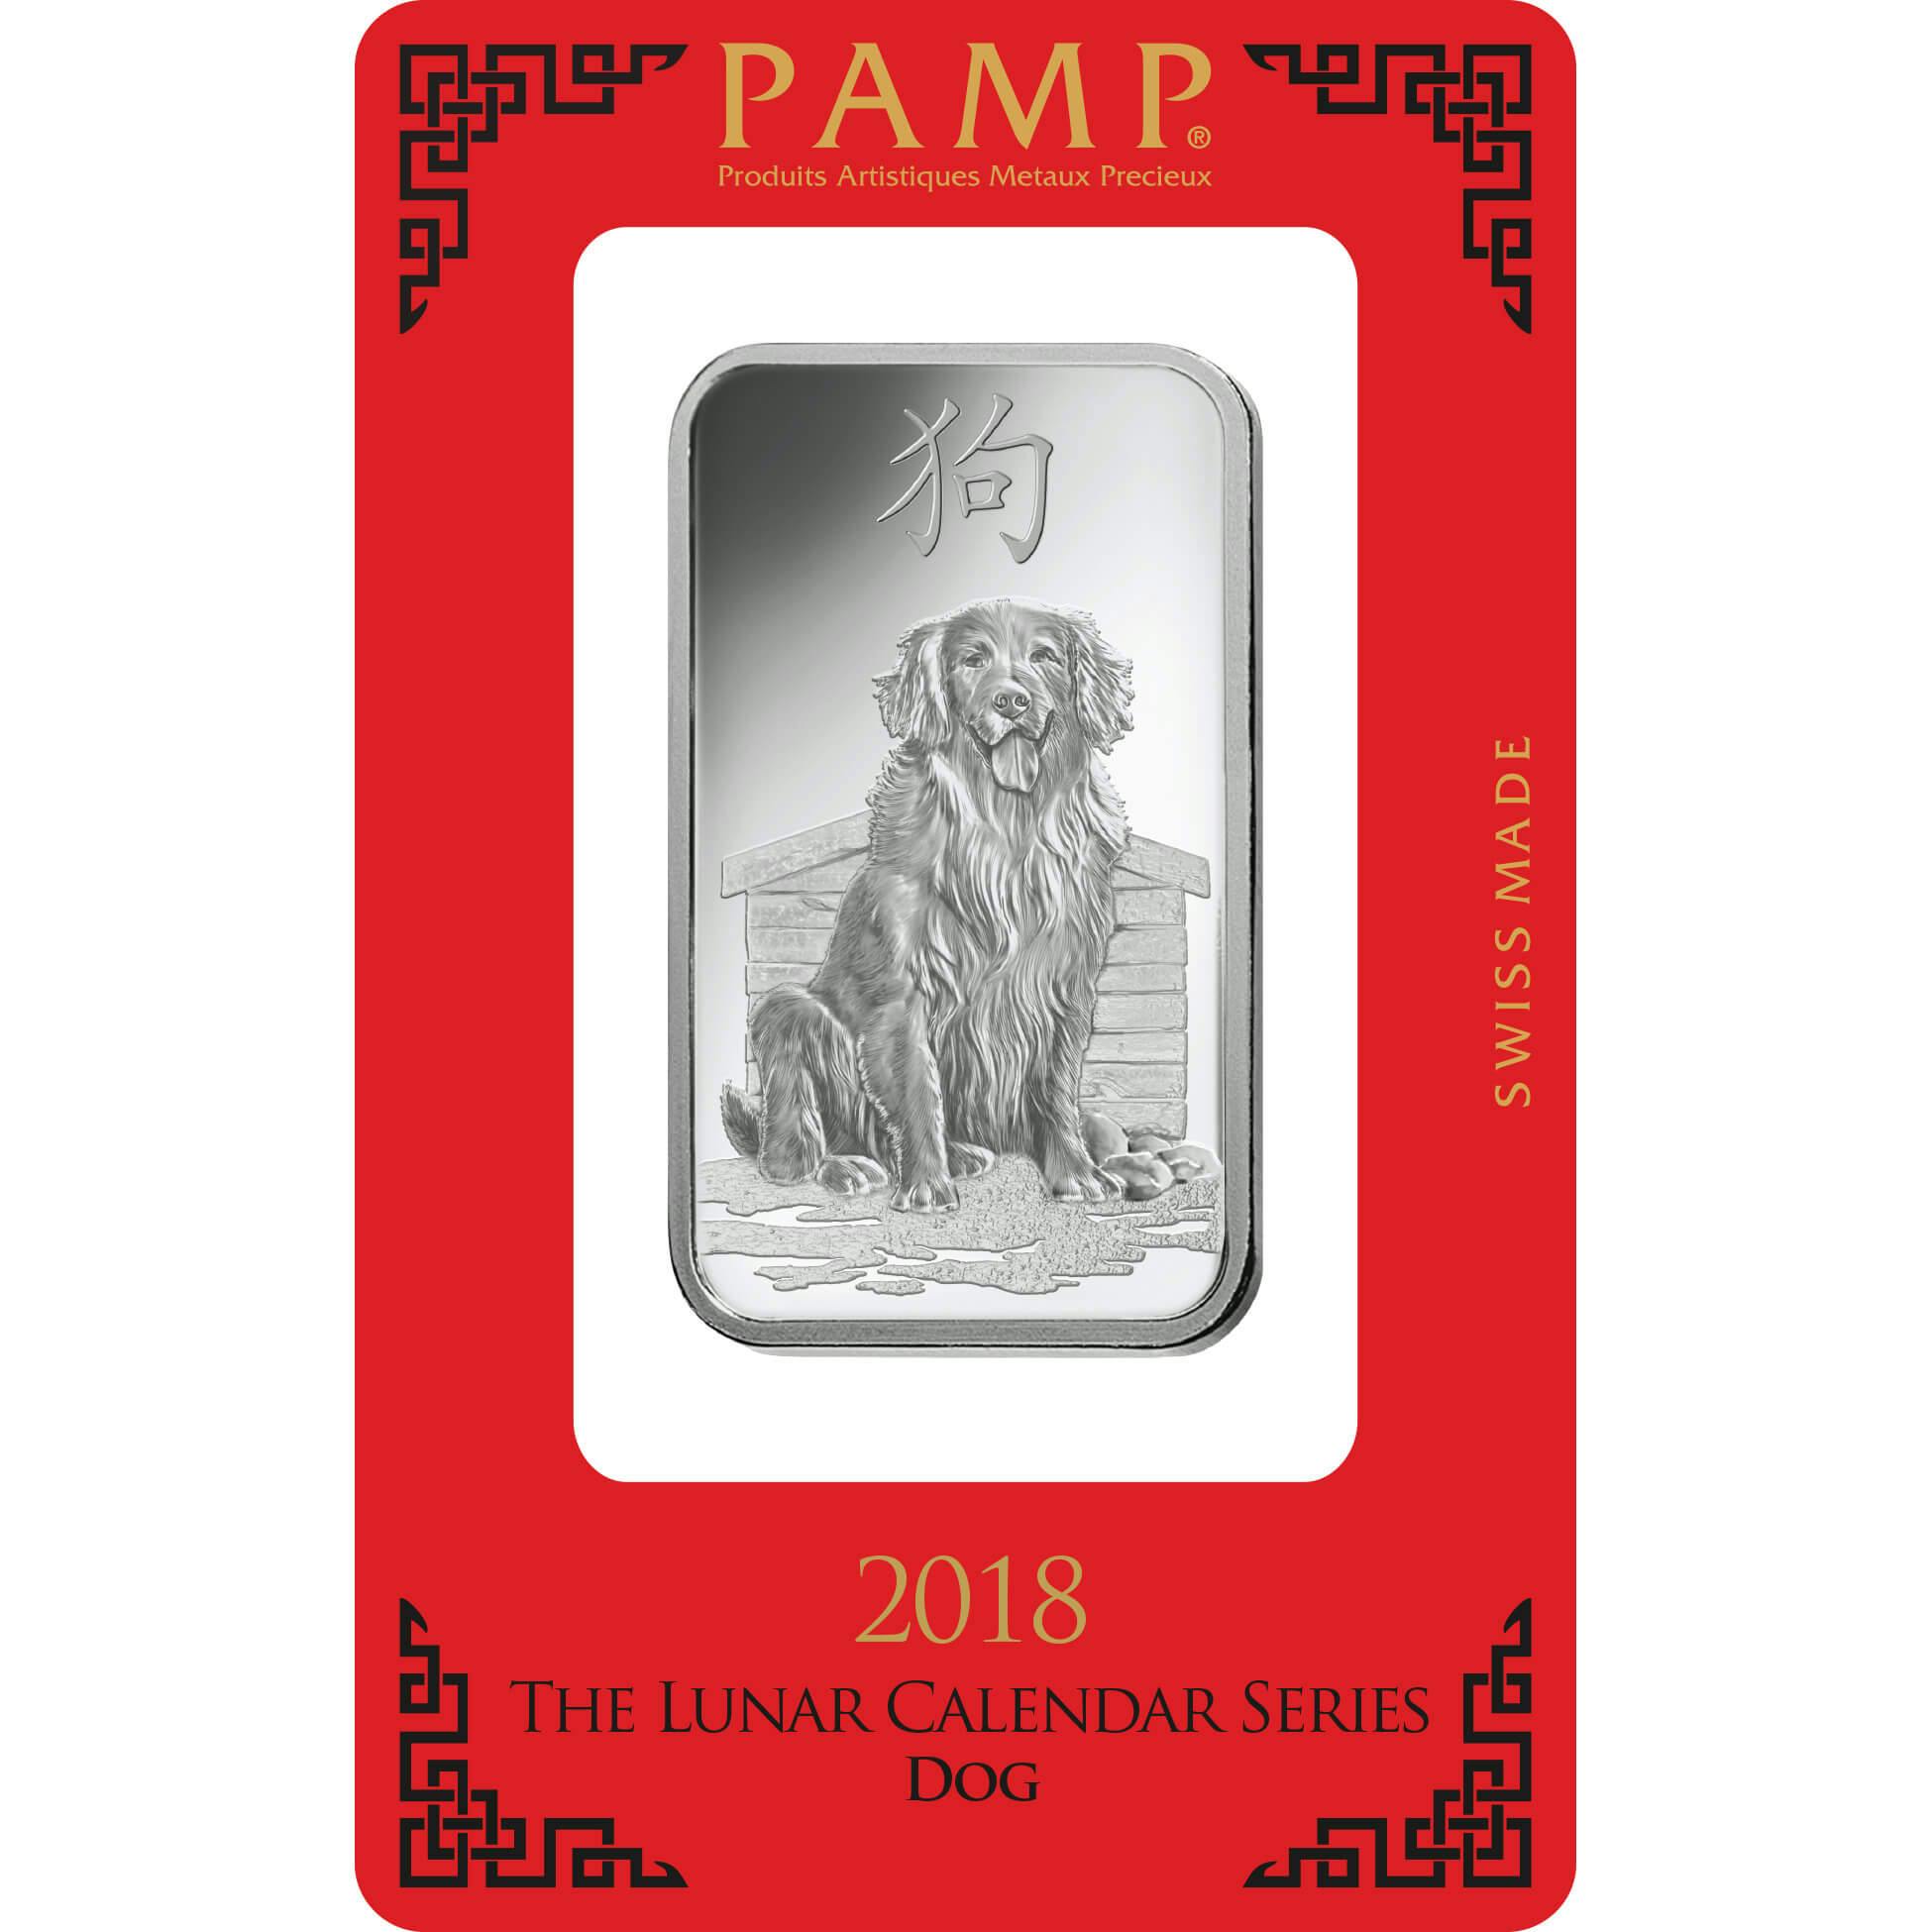 Invest in 1 oz Fine Silver Lunar Dog - PAMP Swiss - Pack Front